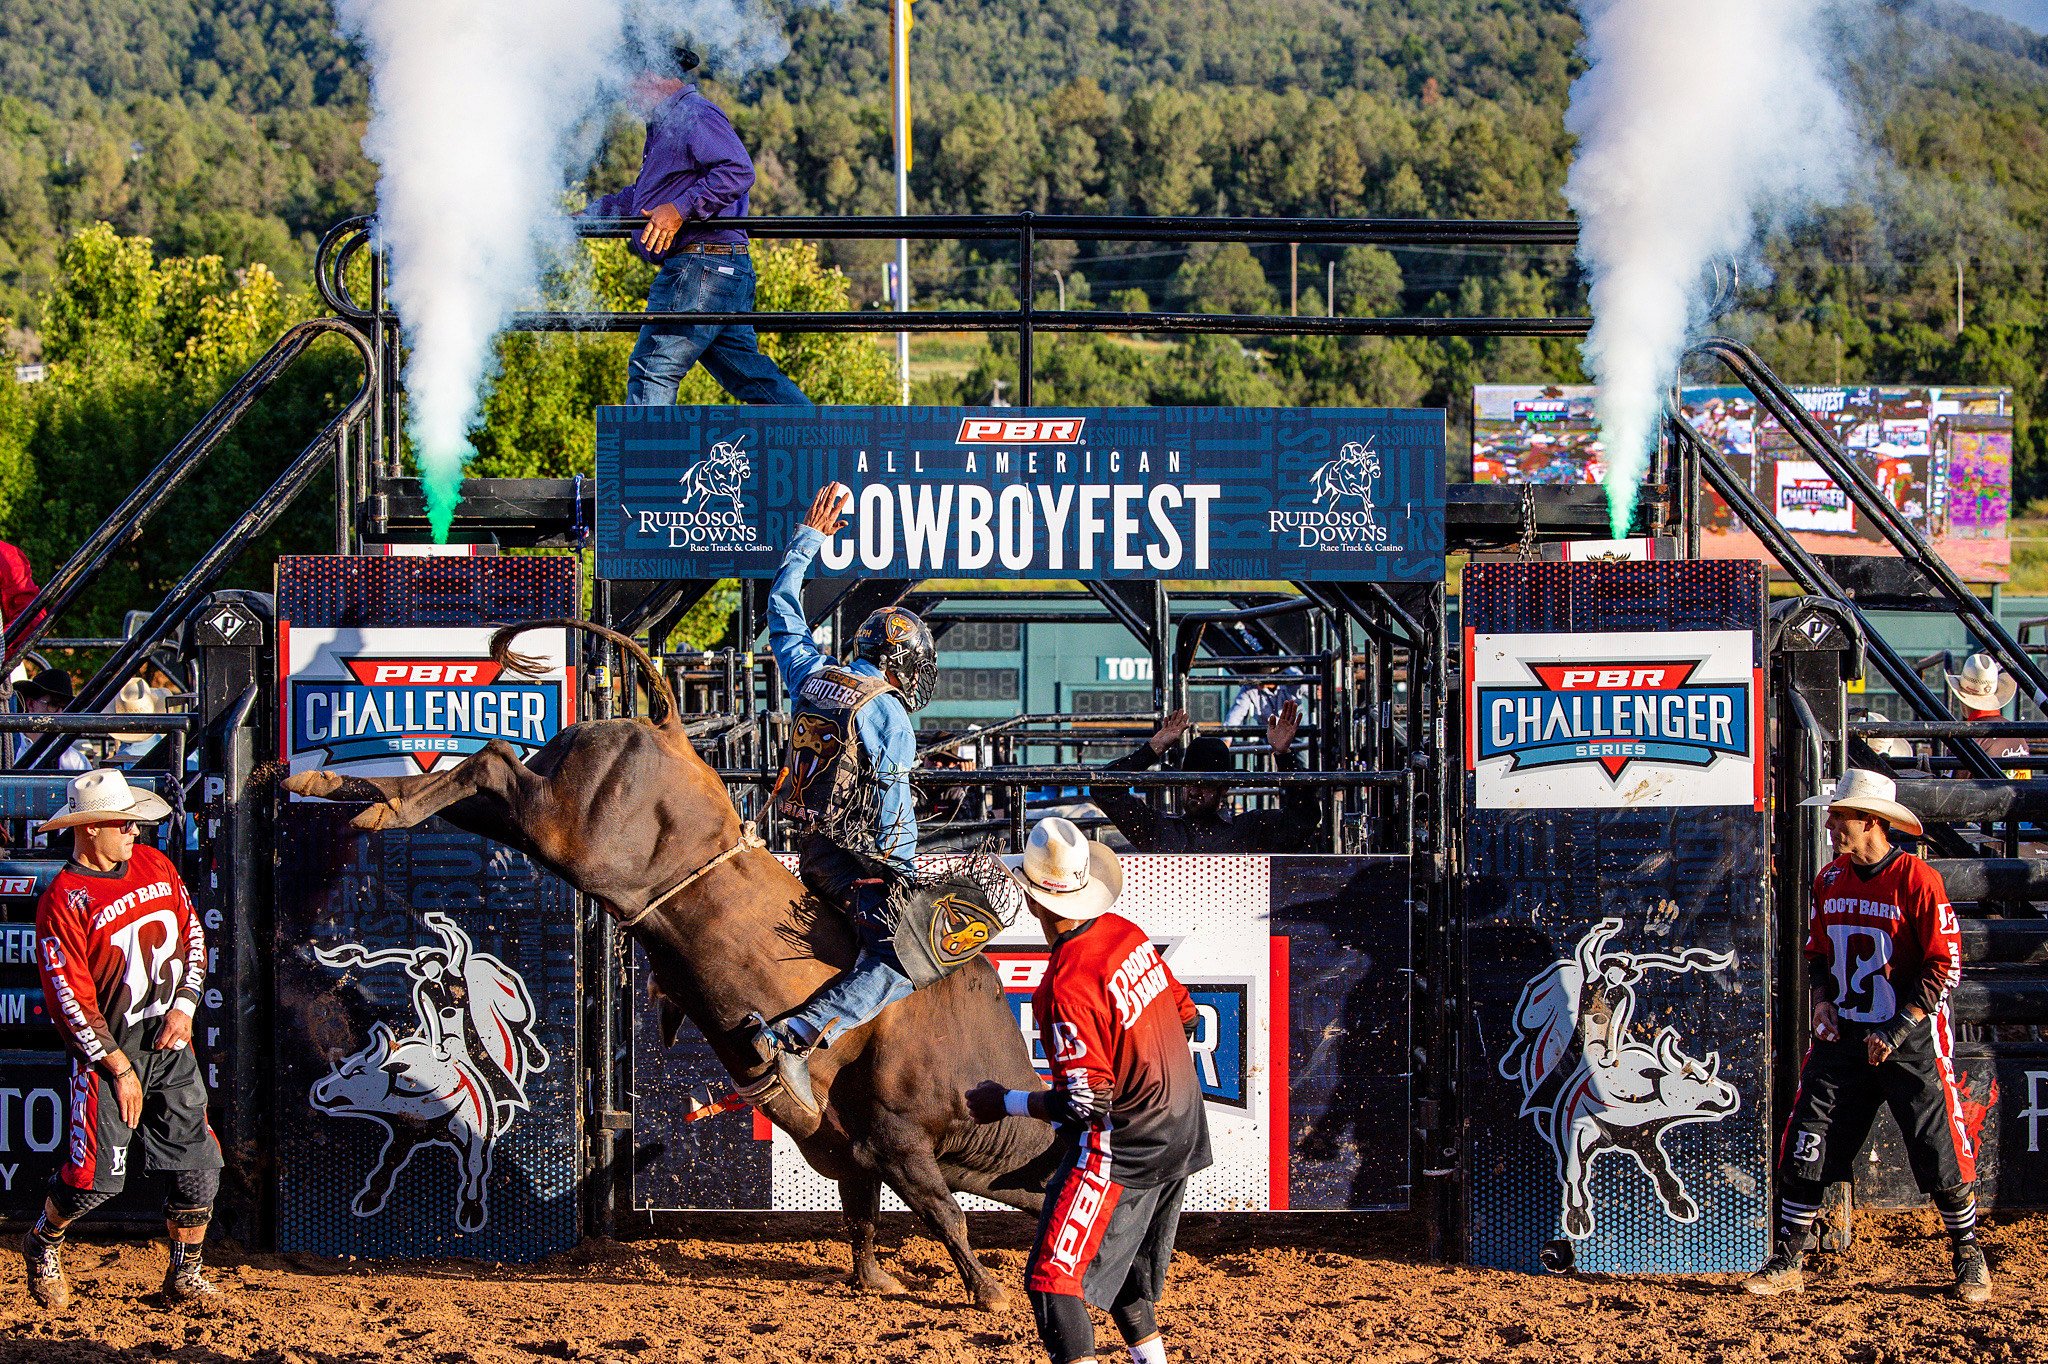 Rough Stock Pro Rodeo — All American CowboyFest